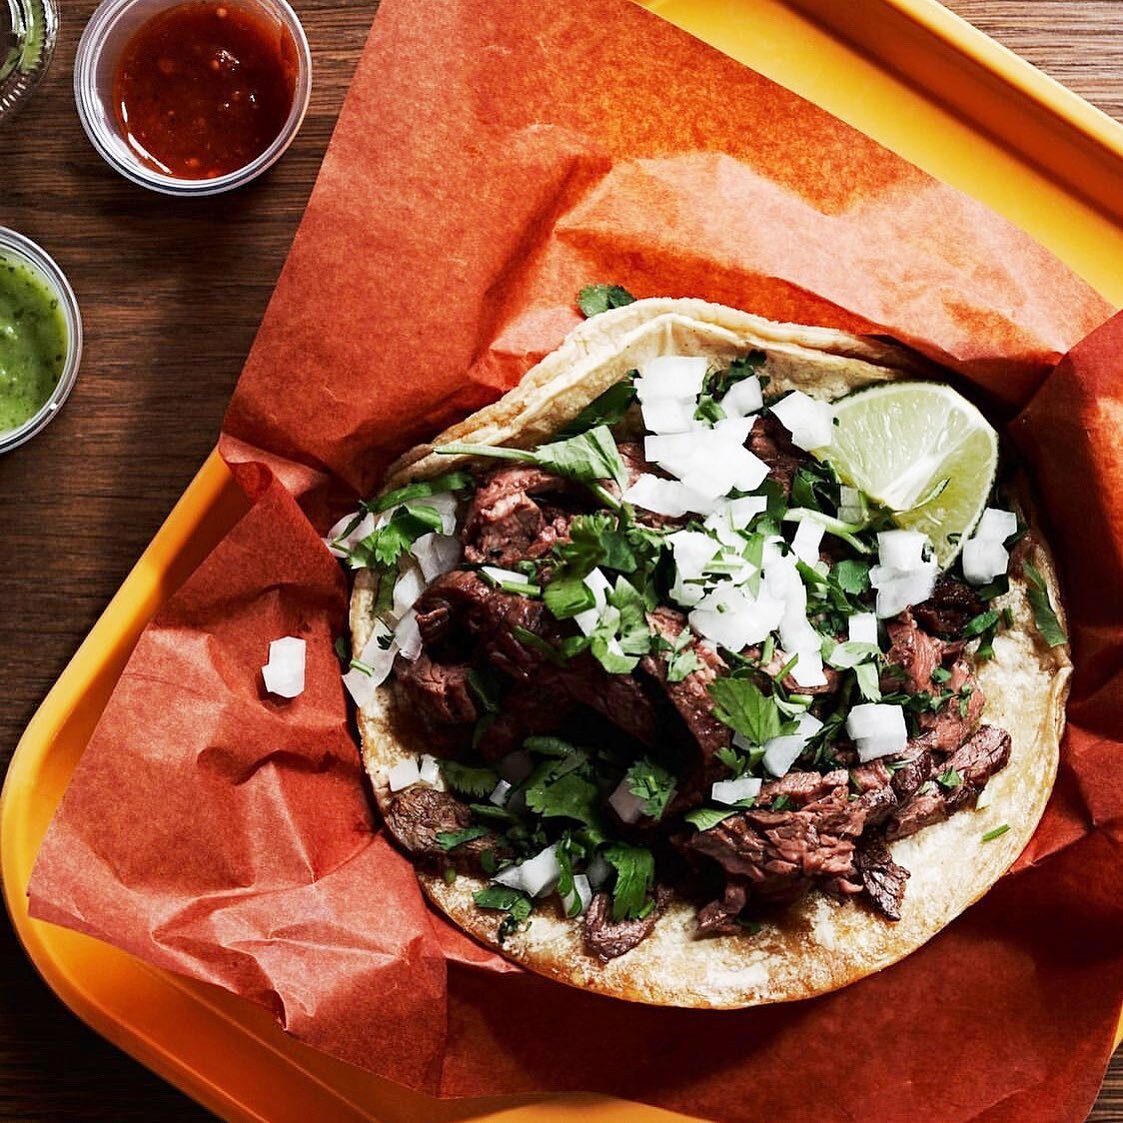 &ldquo;And if you don&rsquo;t know, now you know&hellip;. &ldquo; #biggie  #carneasada tacos are back from siesta! @littlereyalcarbon 🔥 🥩 🌮